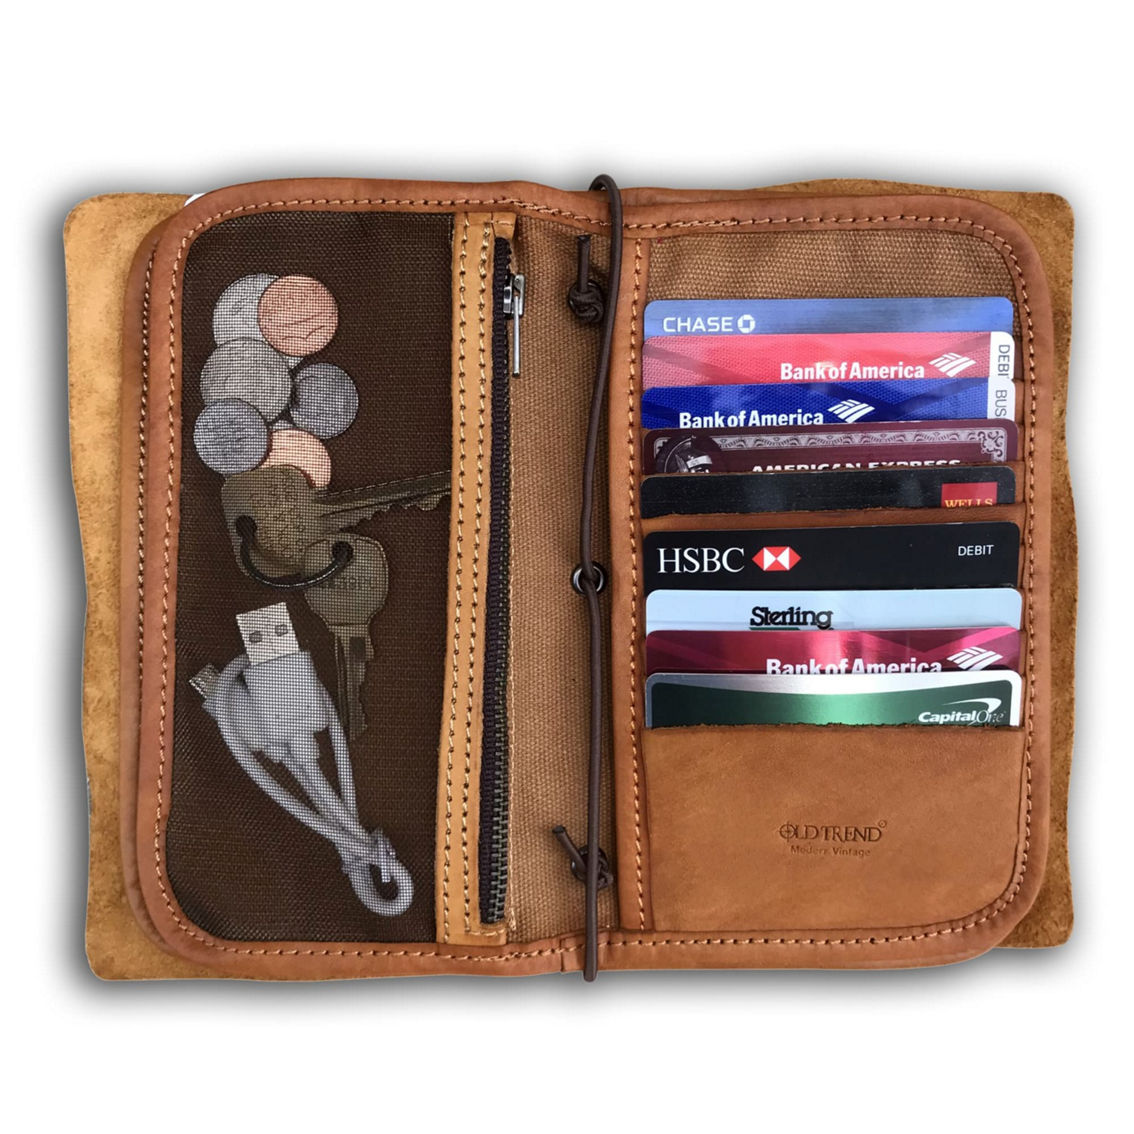 Old Trend Nomad Organizer Leather Wallet - Image 4 of 5